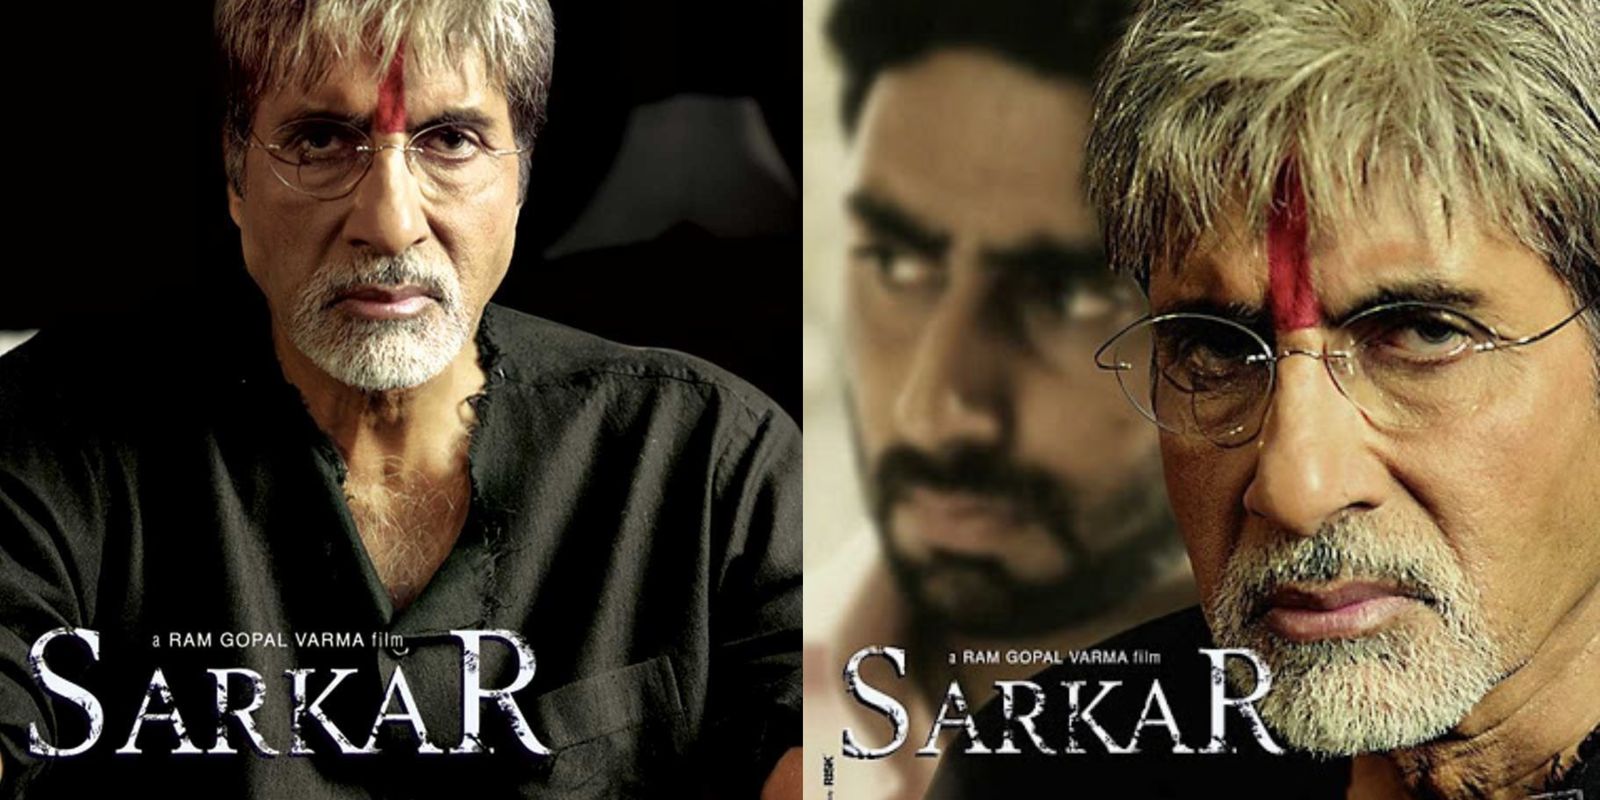 Amitabh Bachchan Celebrates 15 Years Of Sarkar; Fans Shower Social Media With Their Favorite Scenes